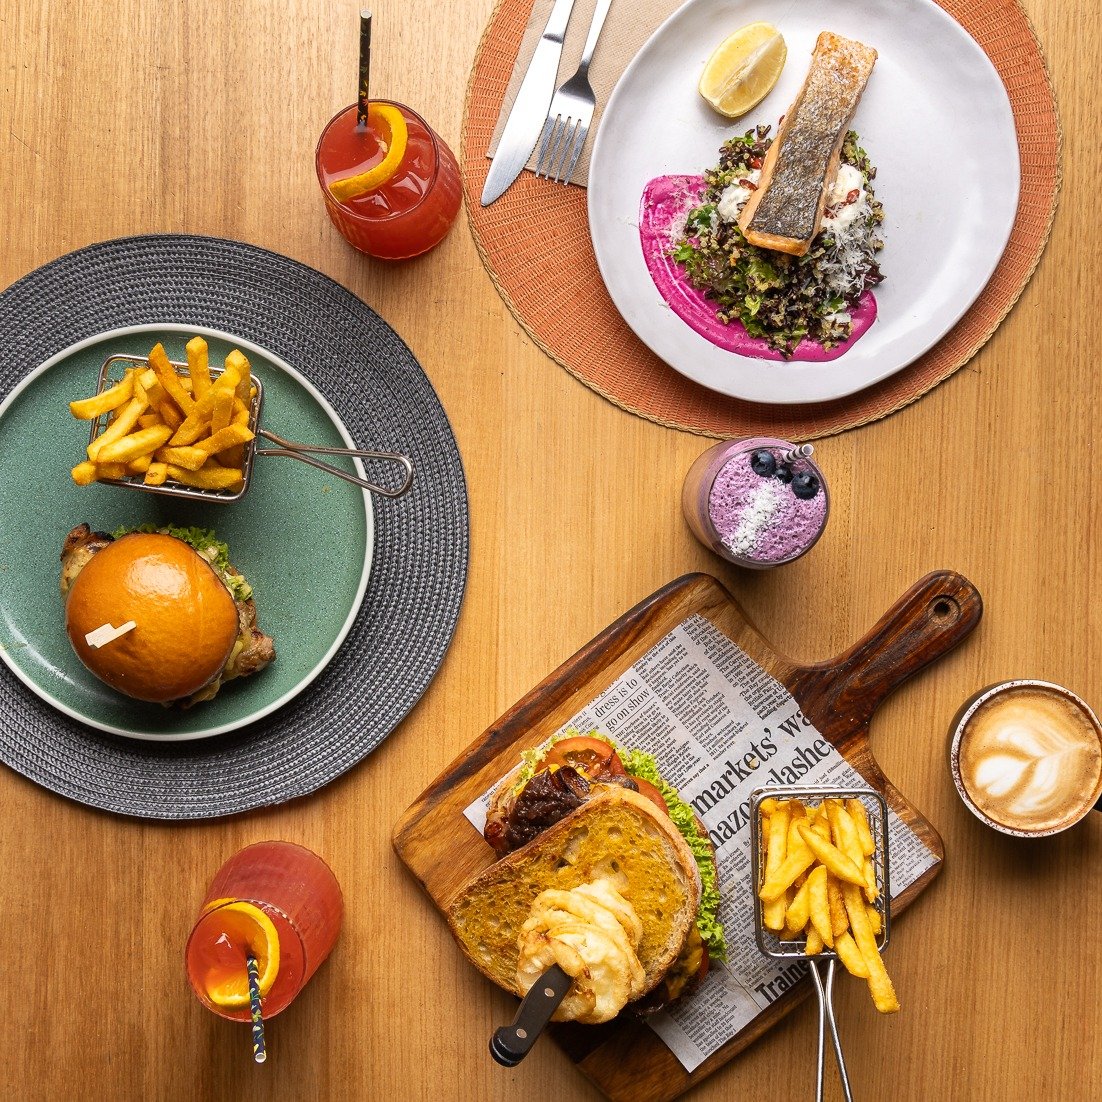 Brunch or lunch? We've got you covered! Dive into the world of delicious flavours at Northside. Whatever the craving we've got something to satisfy you.
&bull;
&bull;
&bull;
#northsidebroadway #melbournebreakfast #melbourne #melbournecafe #melbourneg